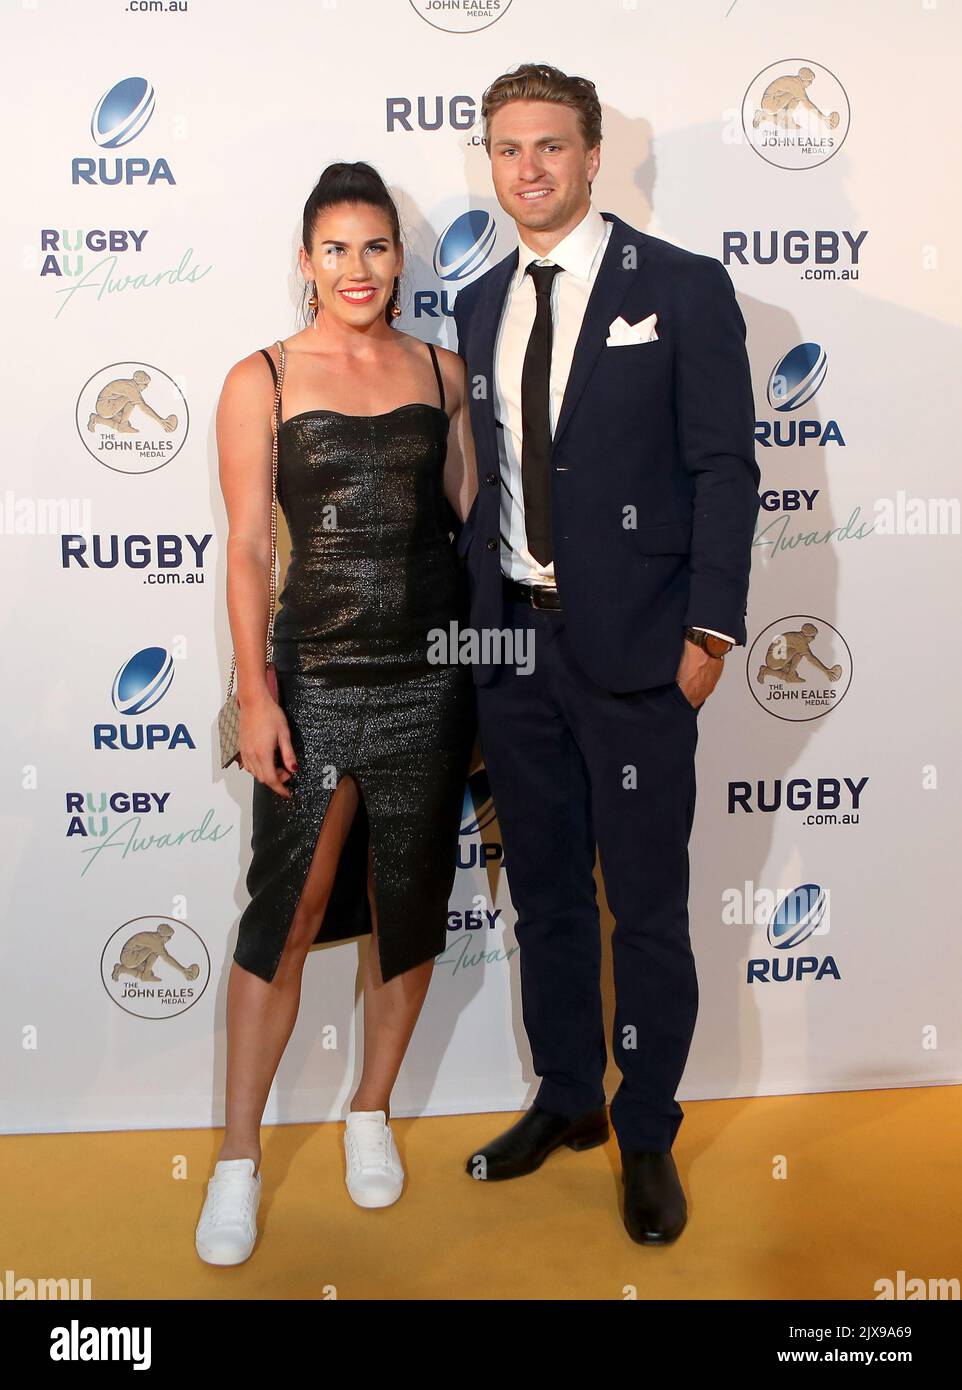 Rugby Sevens player Charlotte Caslick and her partner Lewis Holland pose  for a photograph at the 